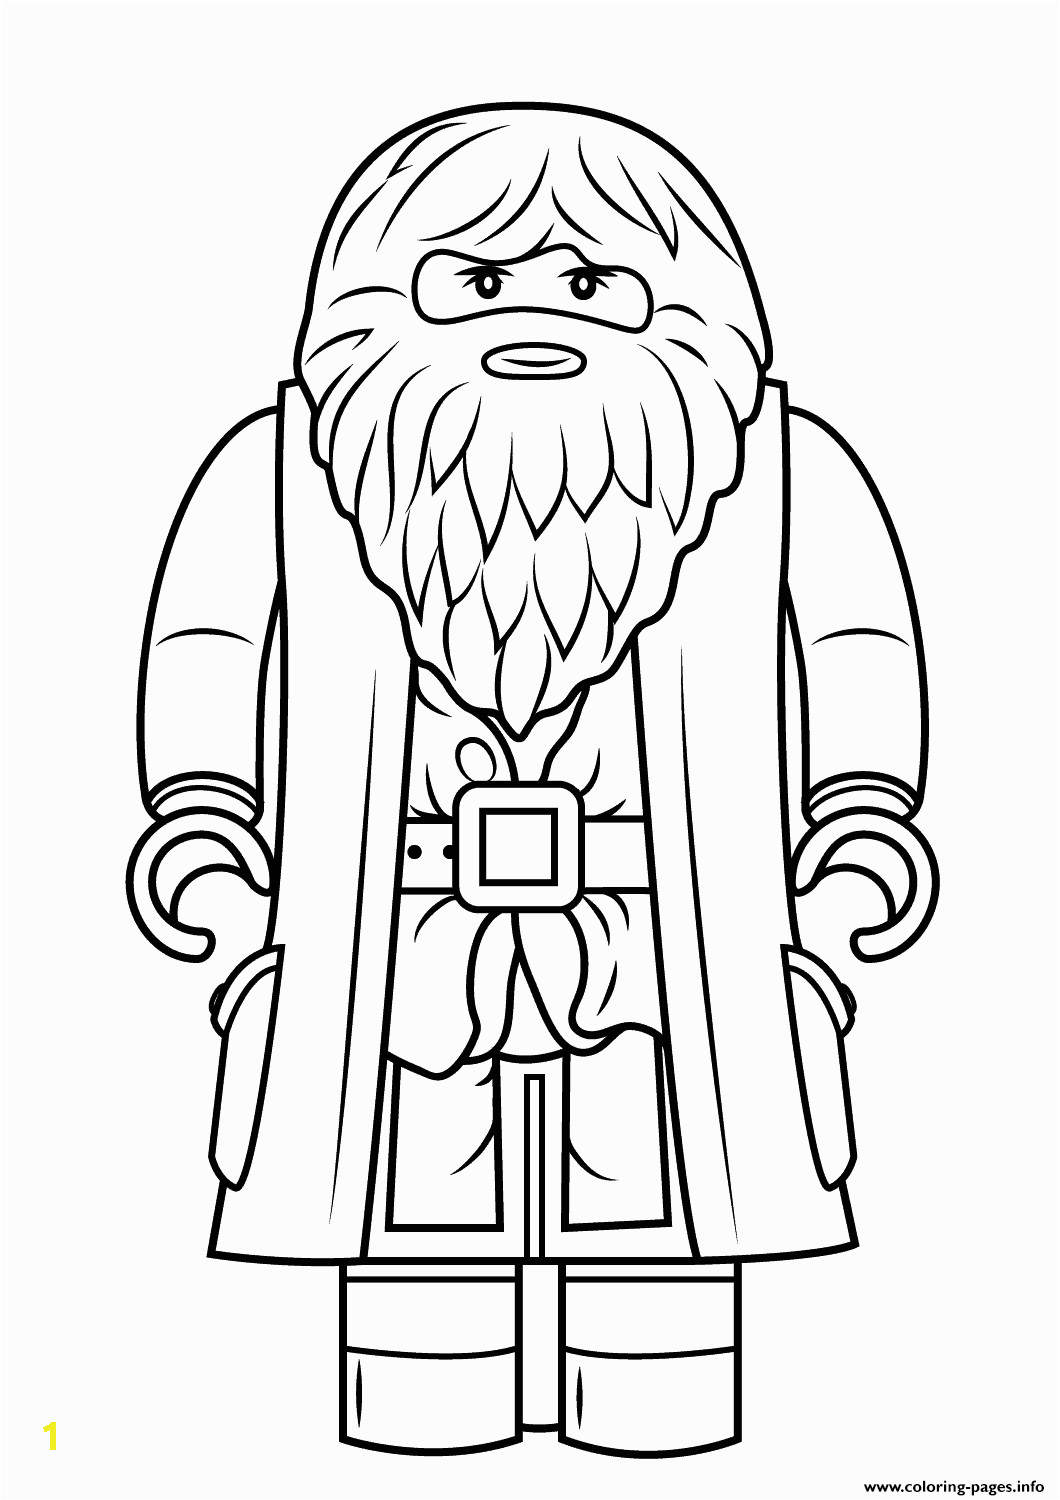 Lego Harry Potter Coloring Pages to Print Lego Harry Potter Coloring Pages Coloring Home